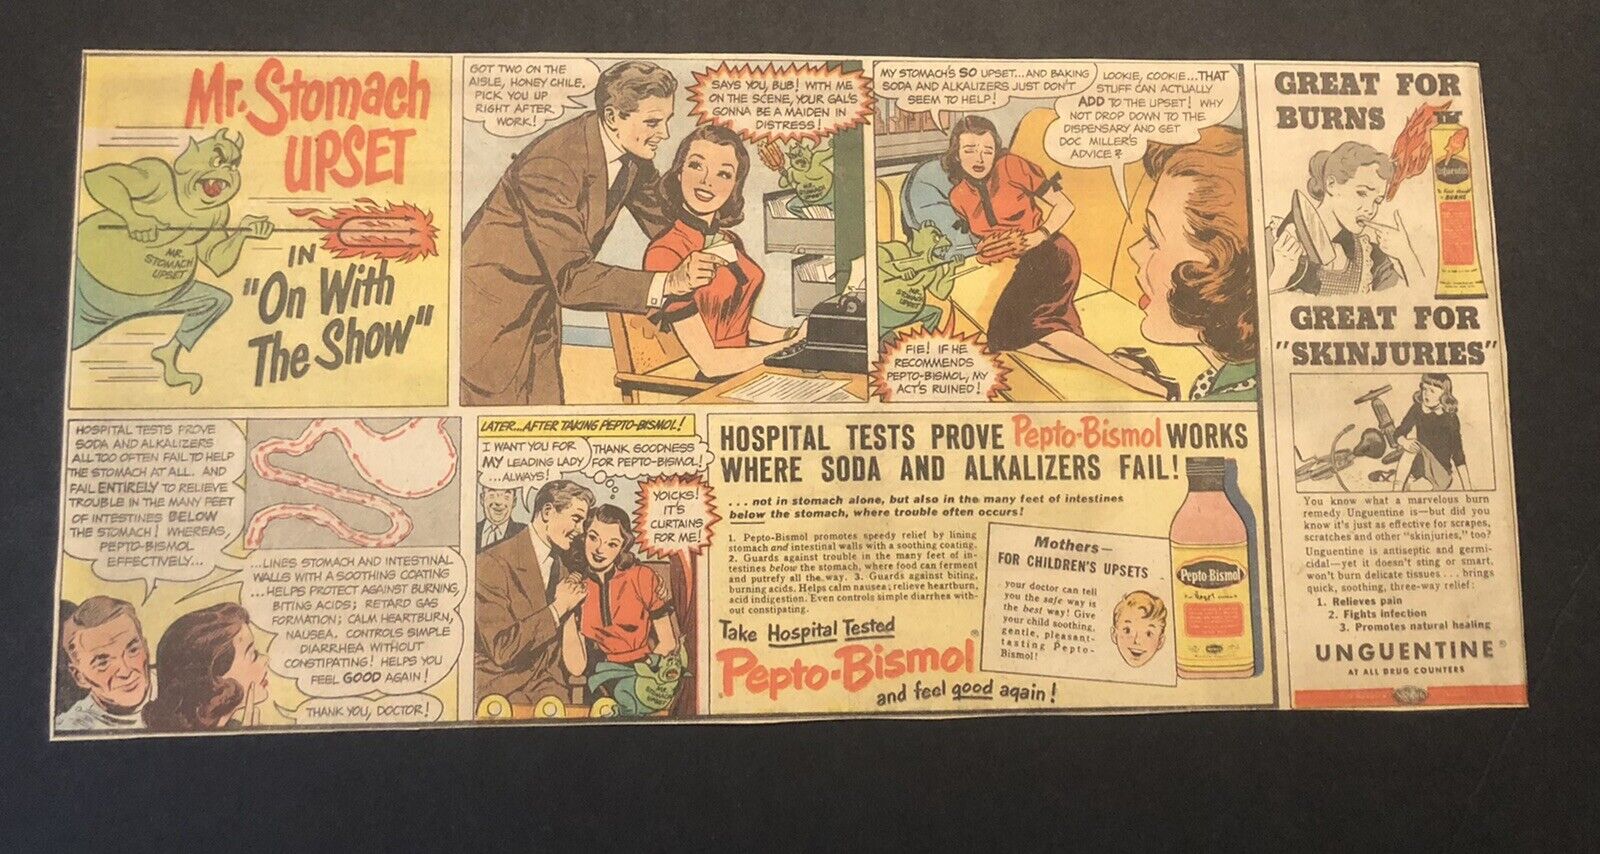 1950’s Mr. Stomach Upset Pepto-Bismol On With The Show  Comic Newspaper Ad